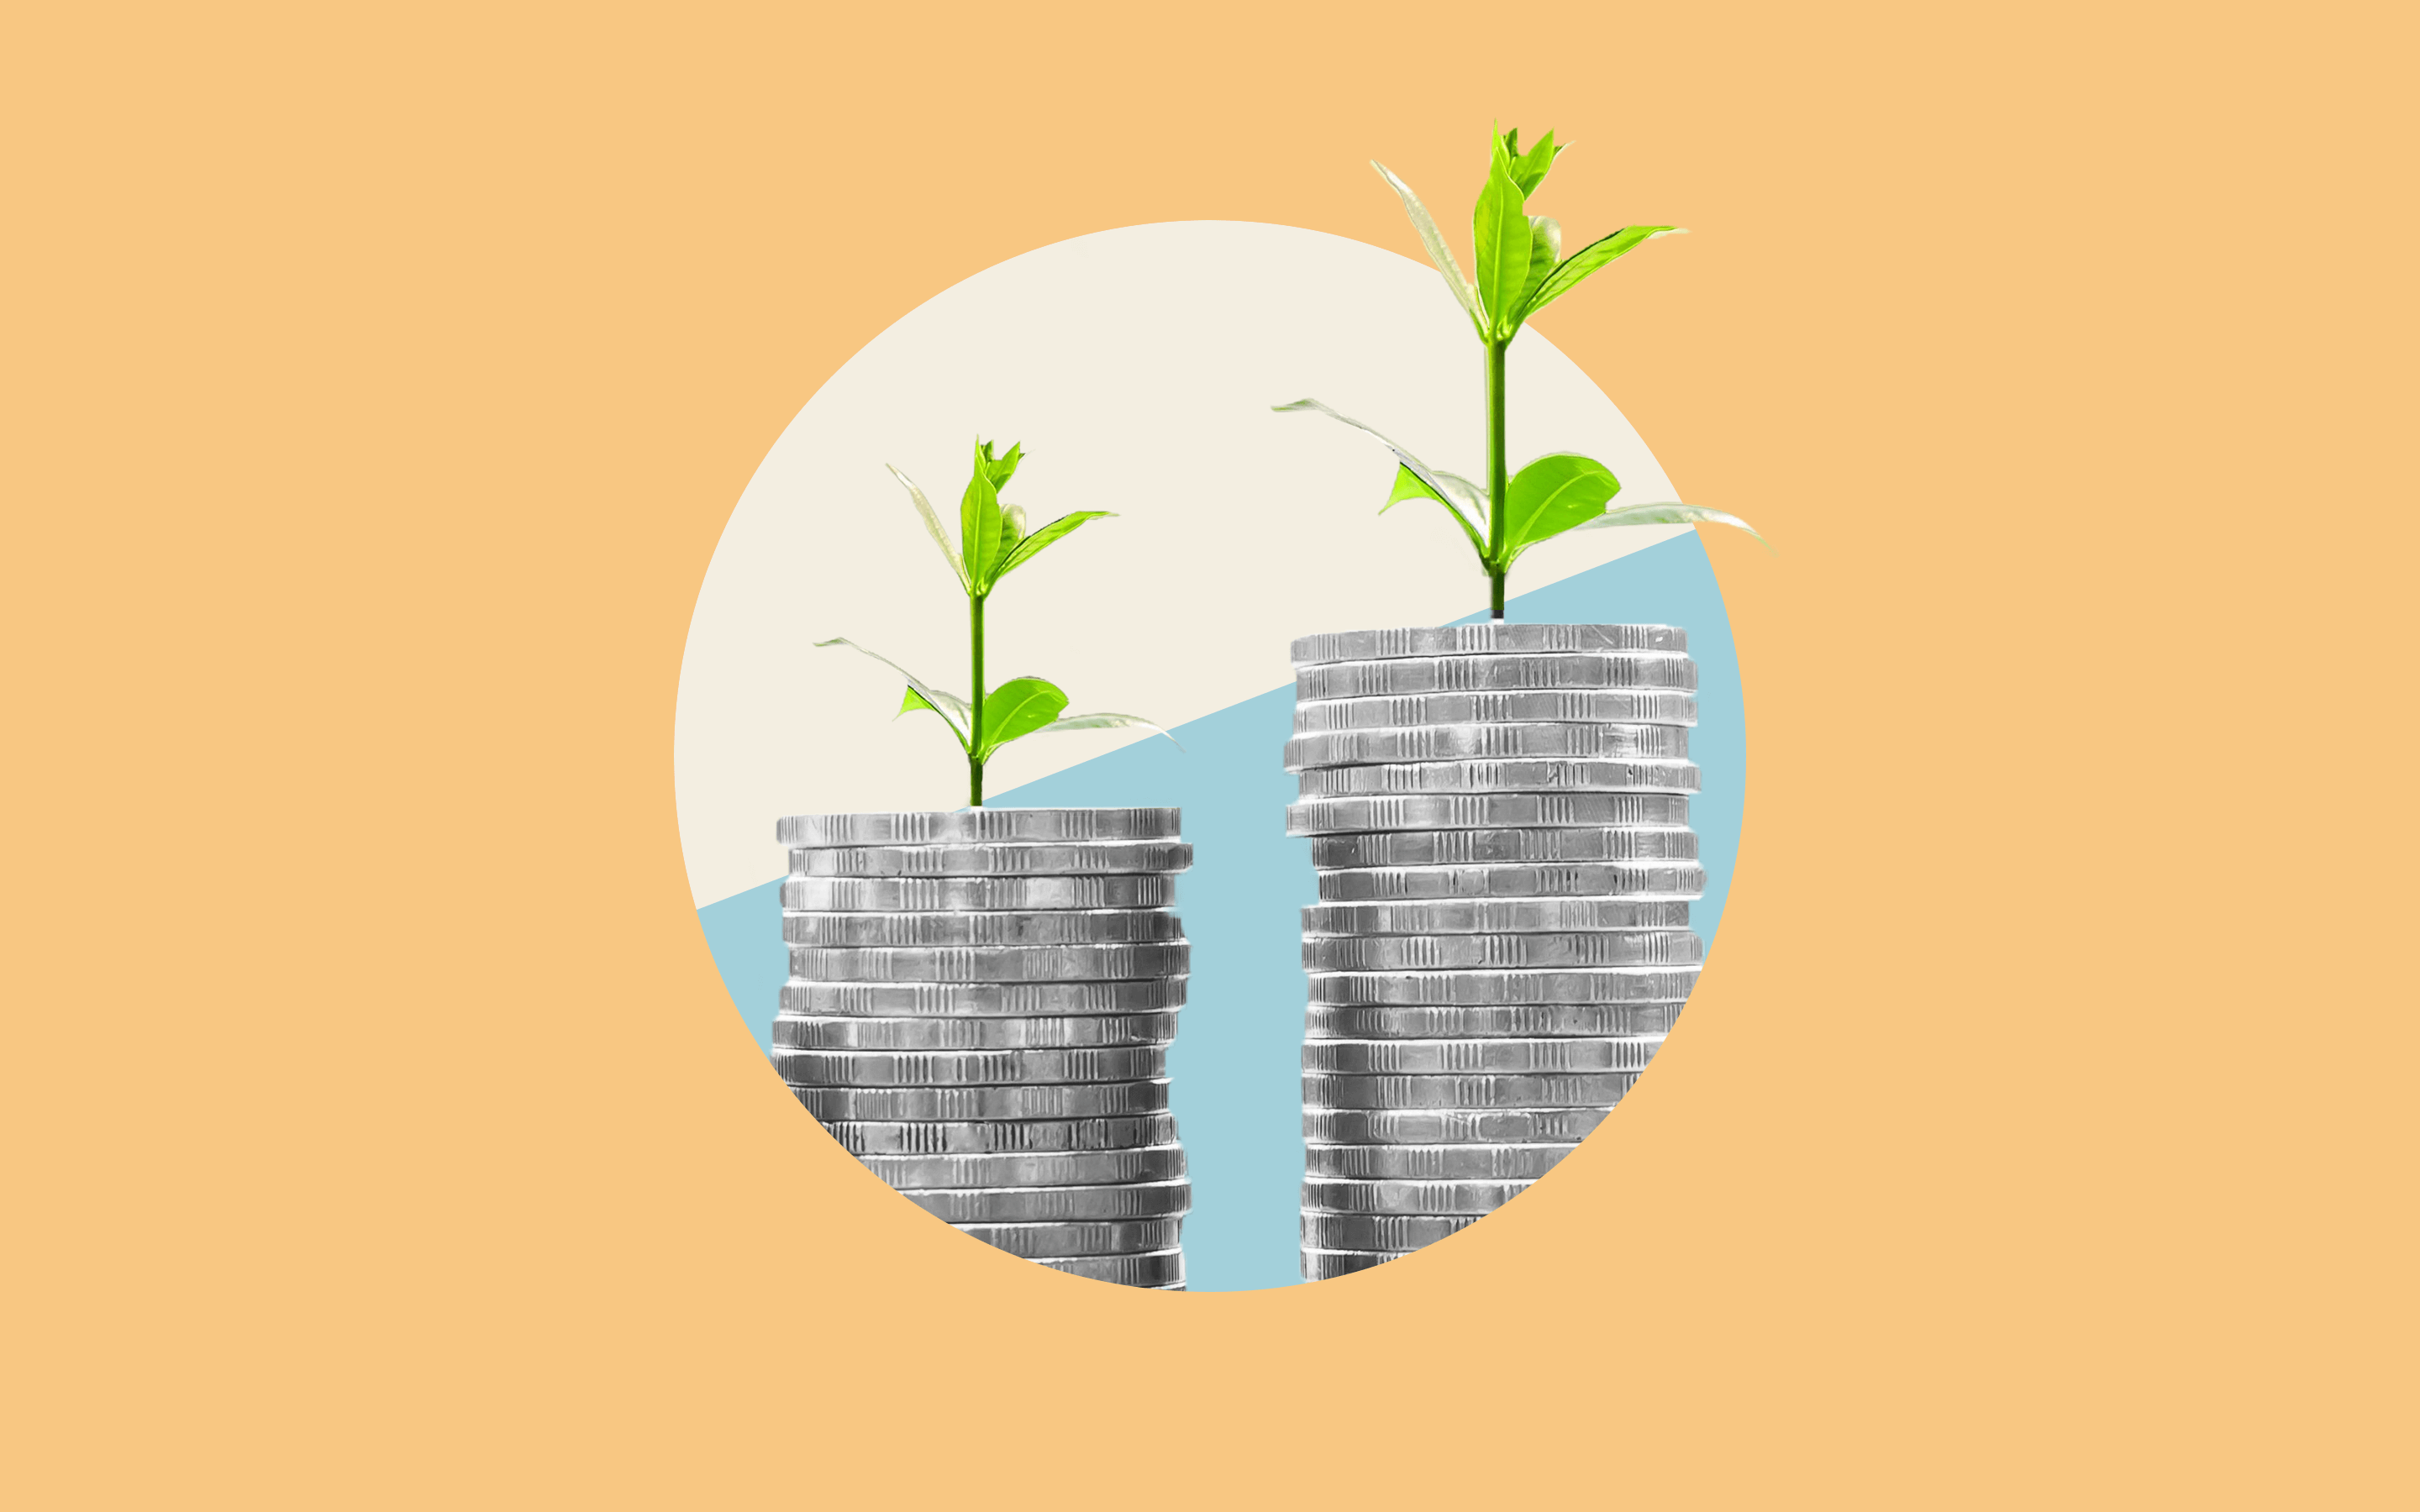 What Role will Impact Investing Play in the Future of Investing?